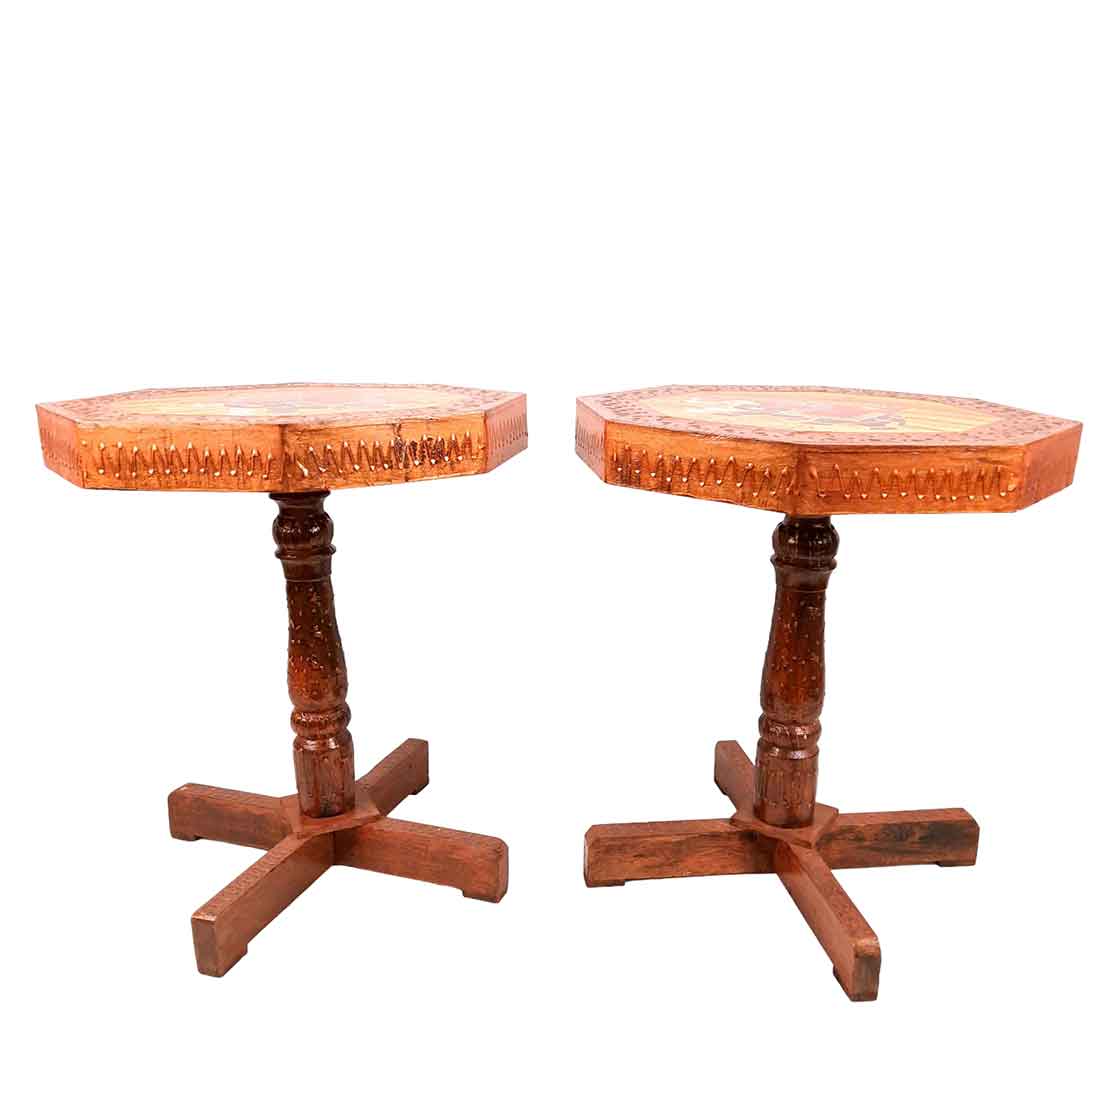 Wood Table | Side Table for Living Room - for Office Decor & Gifts - Set of 2 - ApkaMart